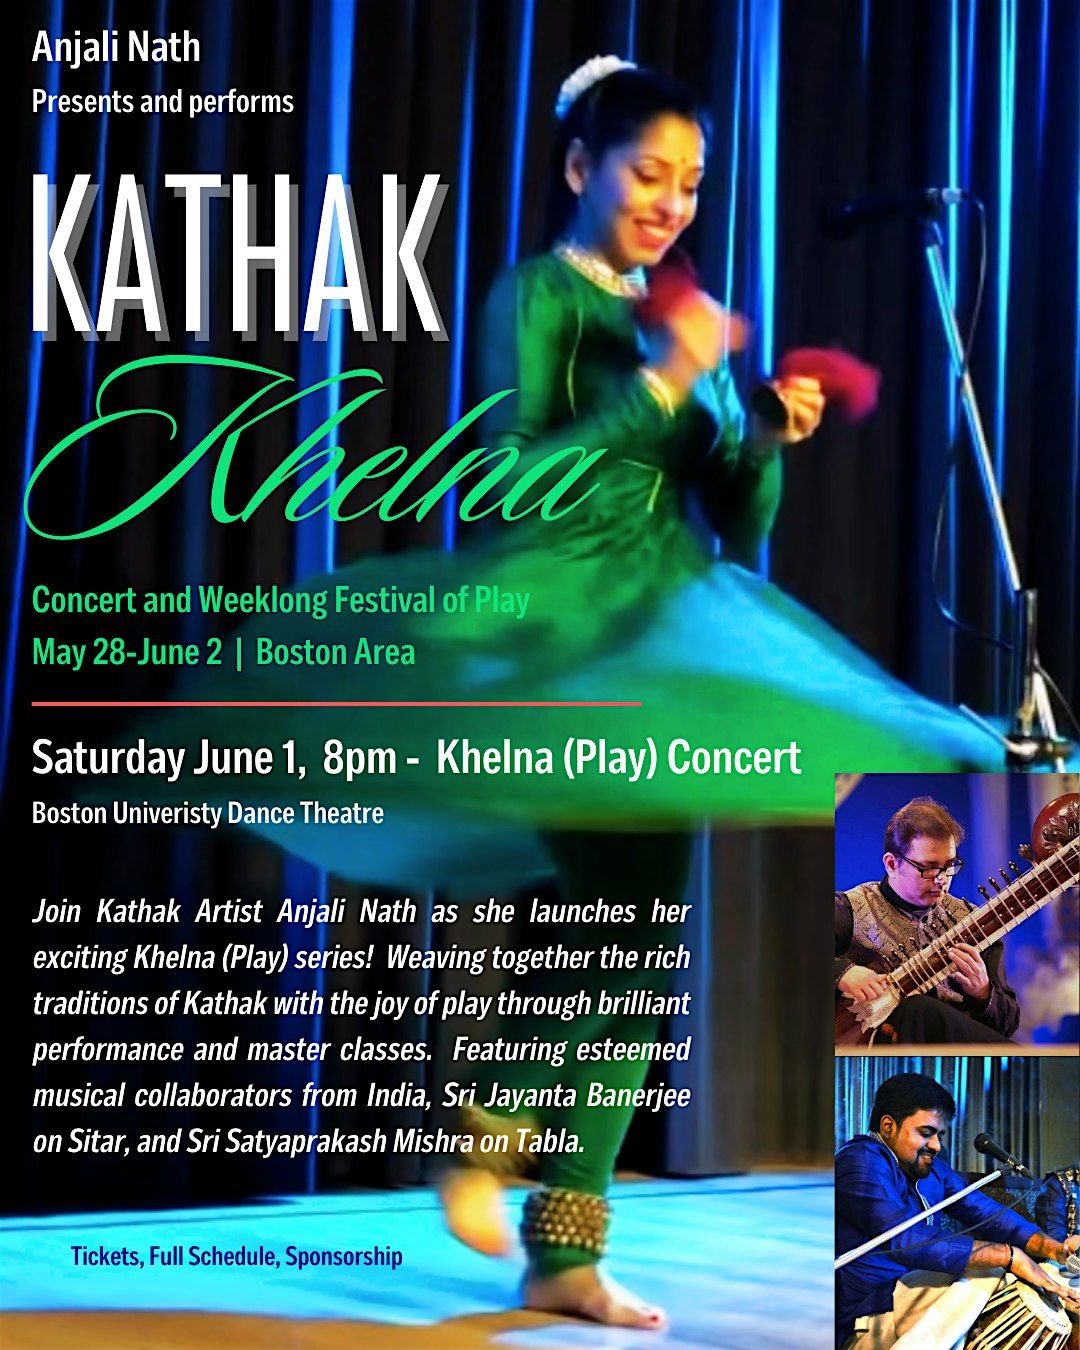 Khelna - Concert and Weeklong Festival of Play! - Indian Music and Dance